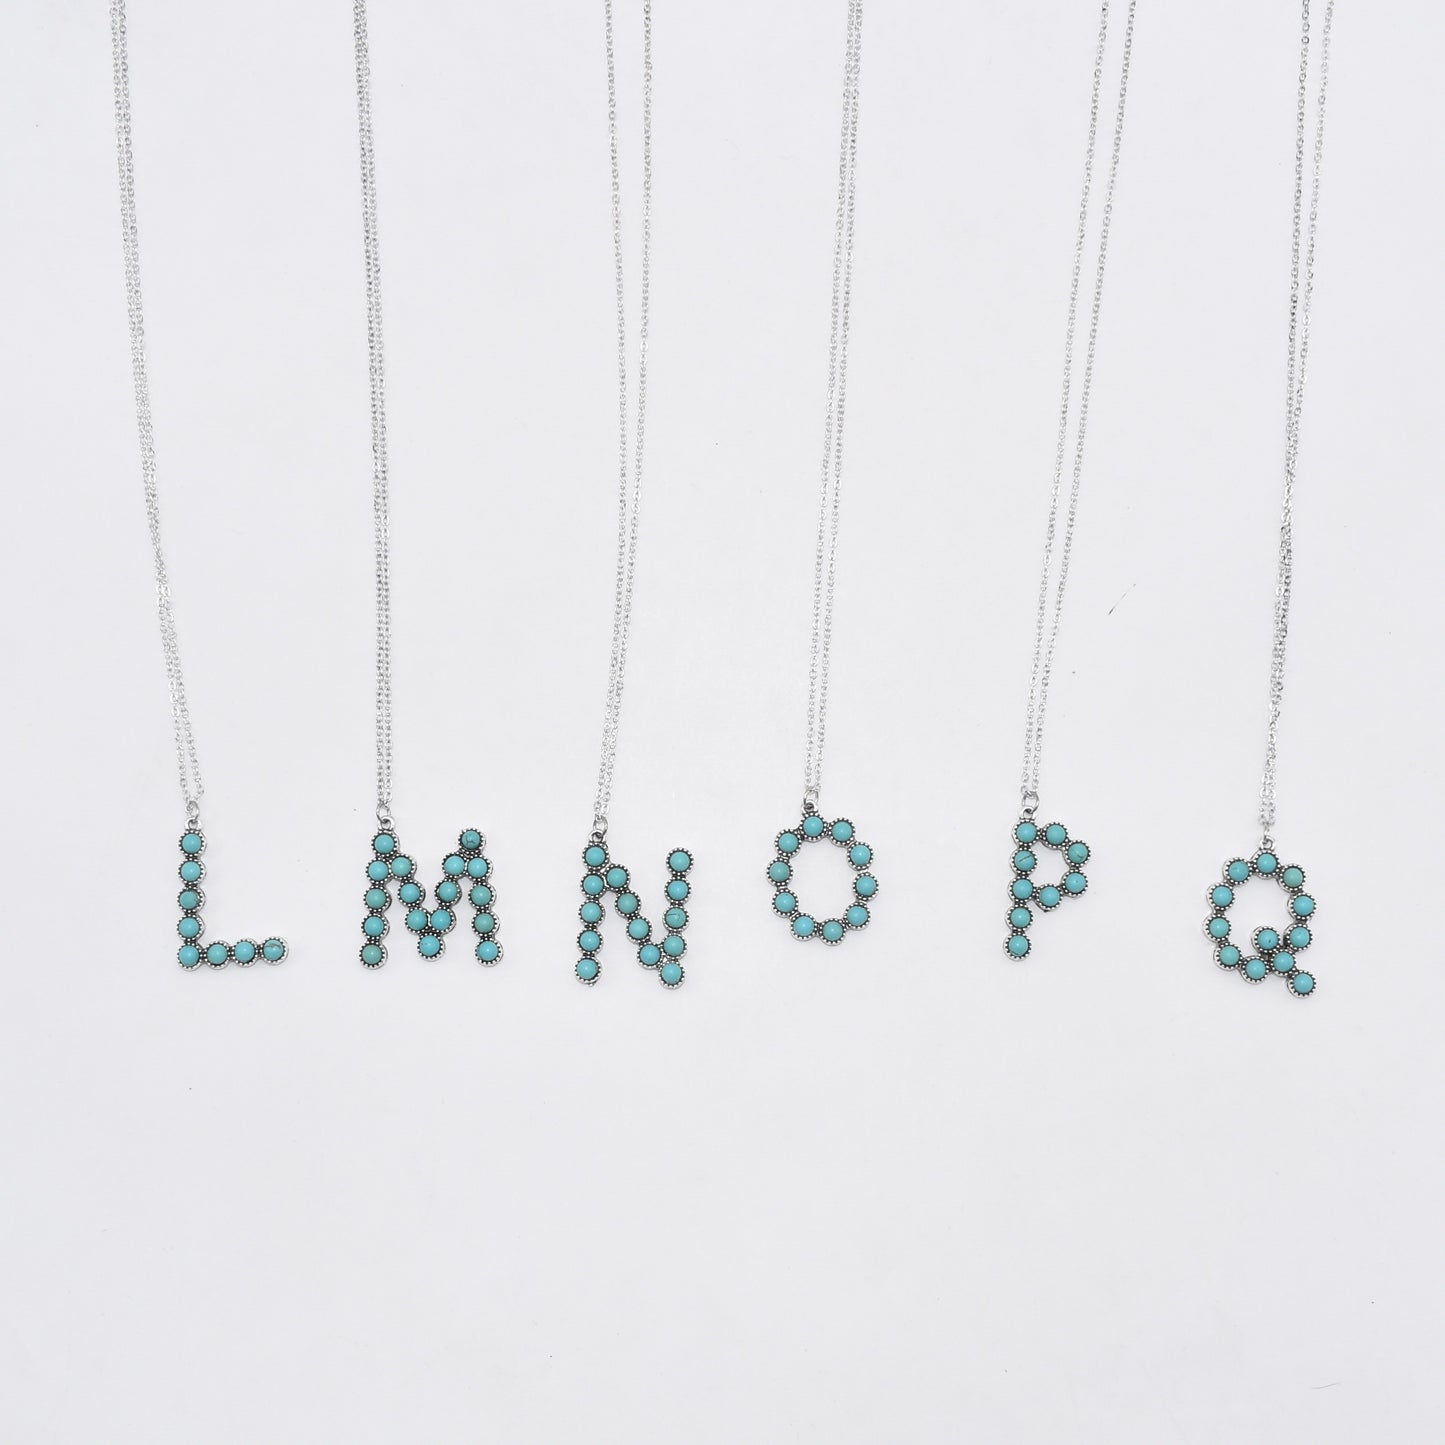 Turquoise Initial Necklaces